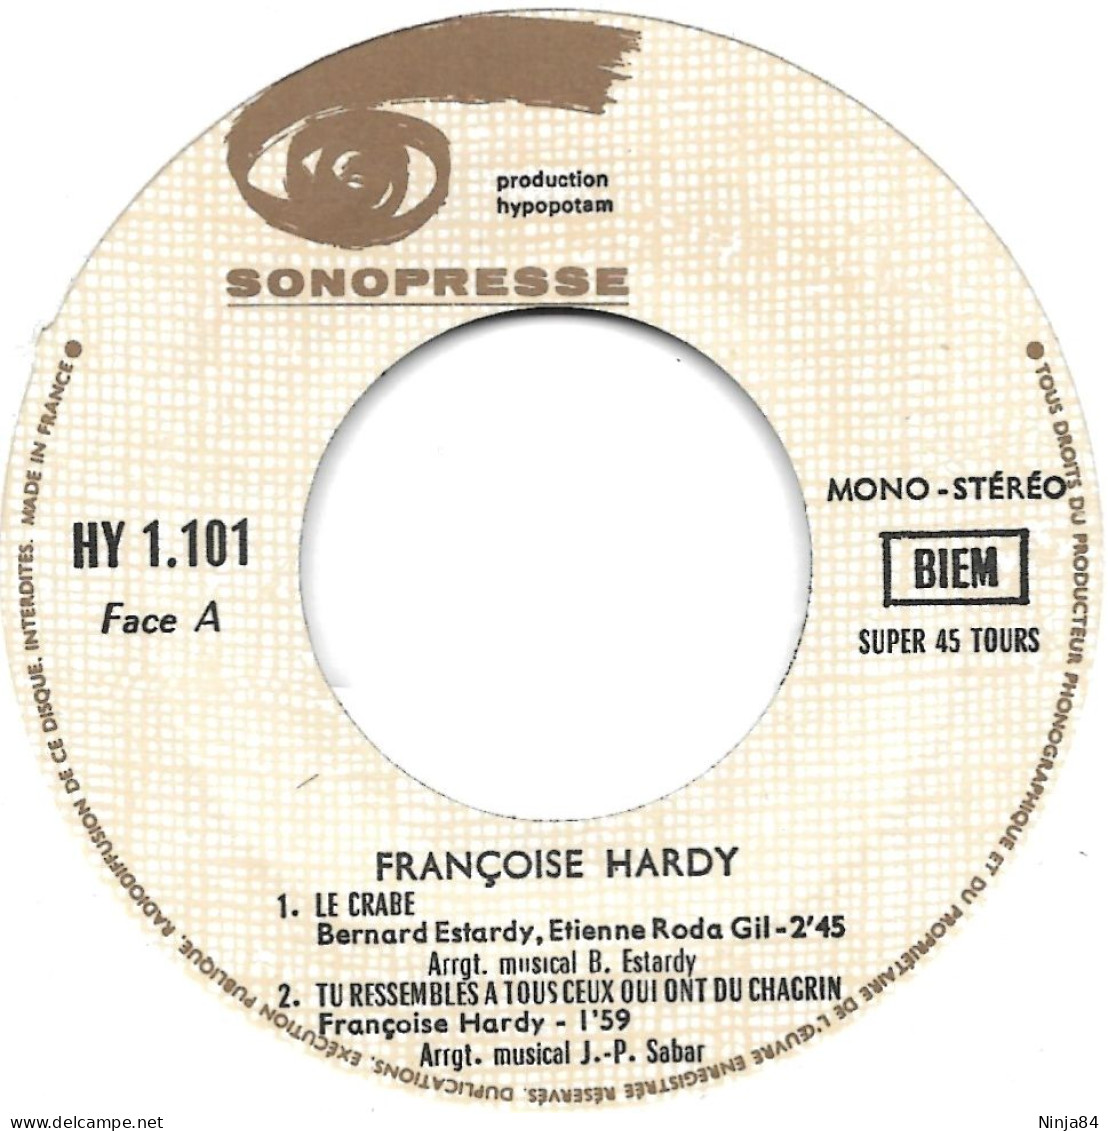 EP 45 RPM (7") Françoise Hardy  "  Le Crabe  " - Other - French Music